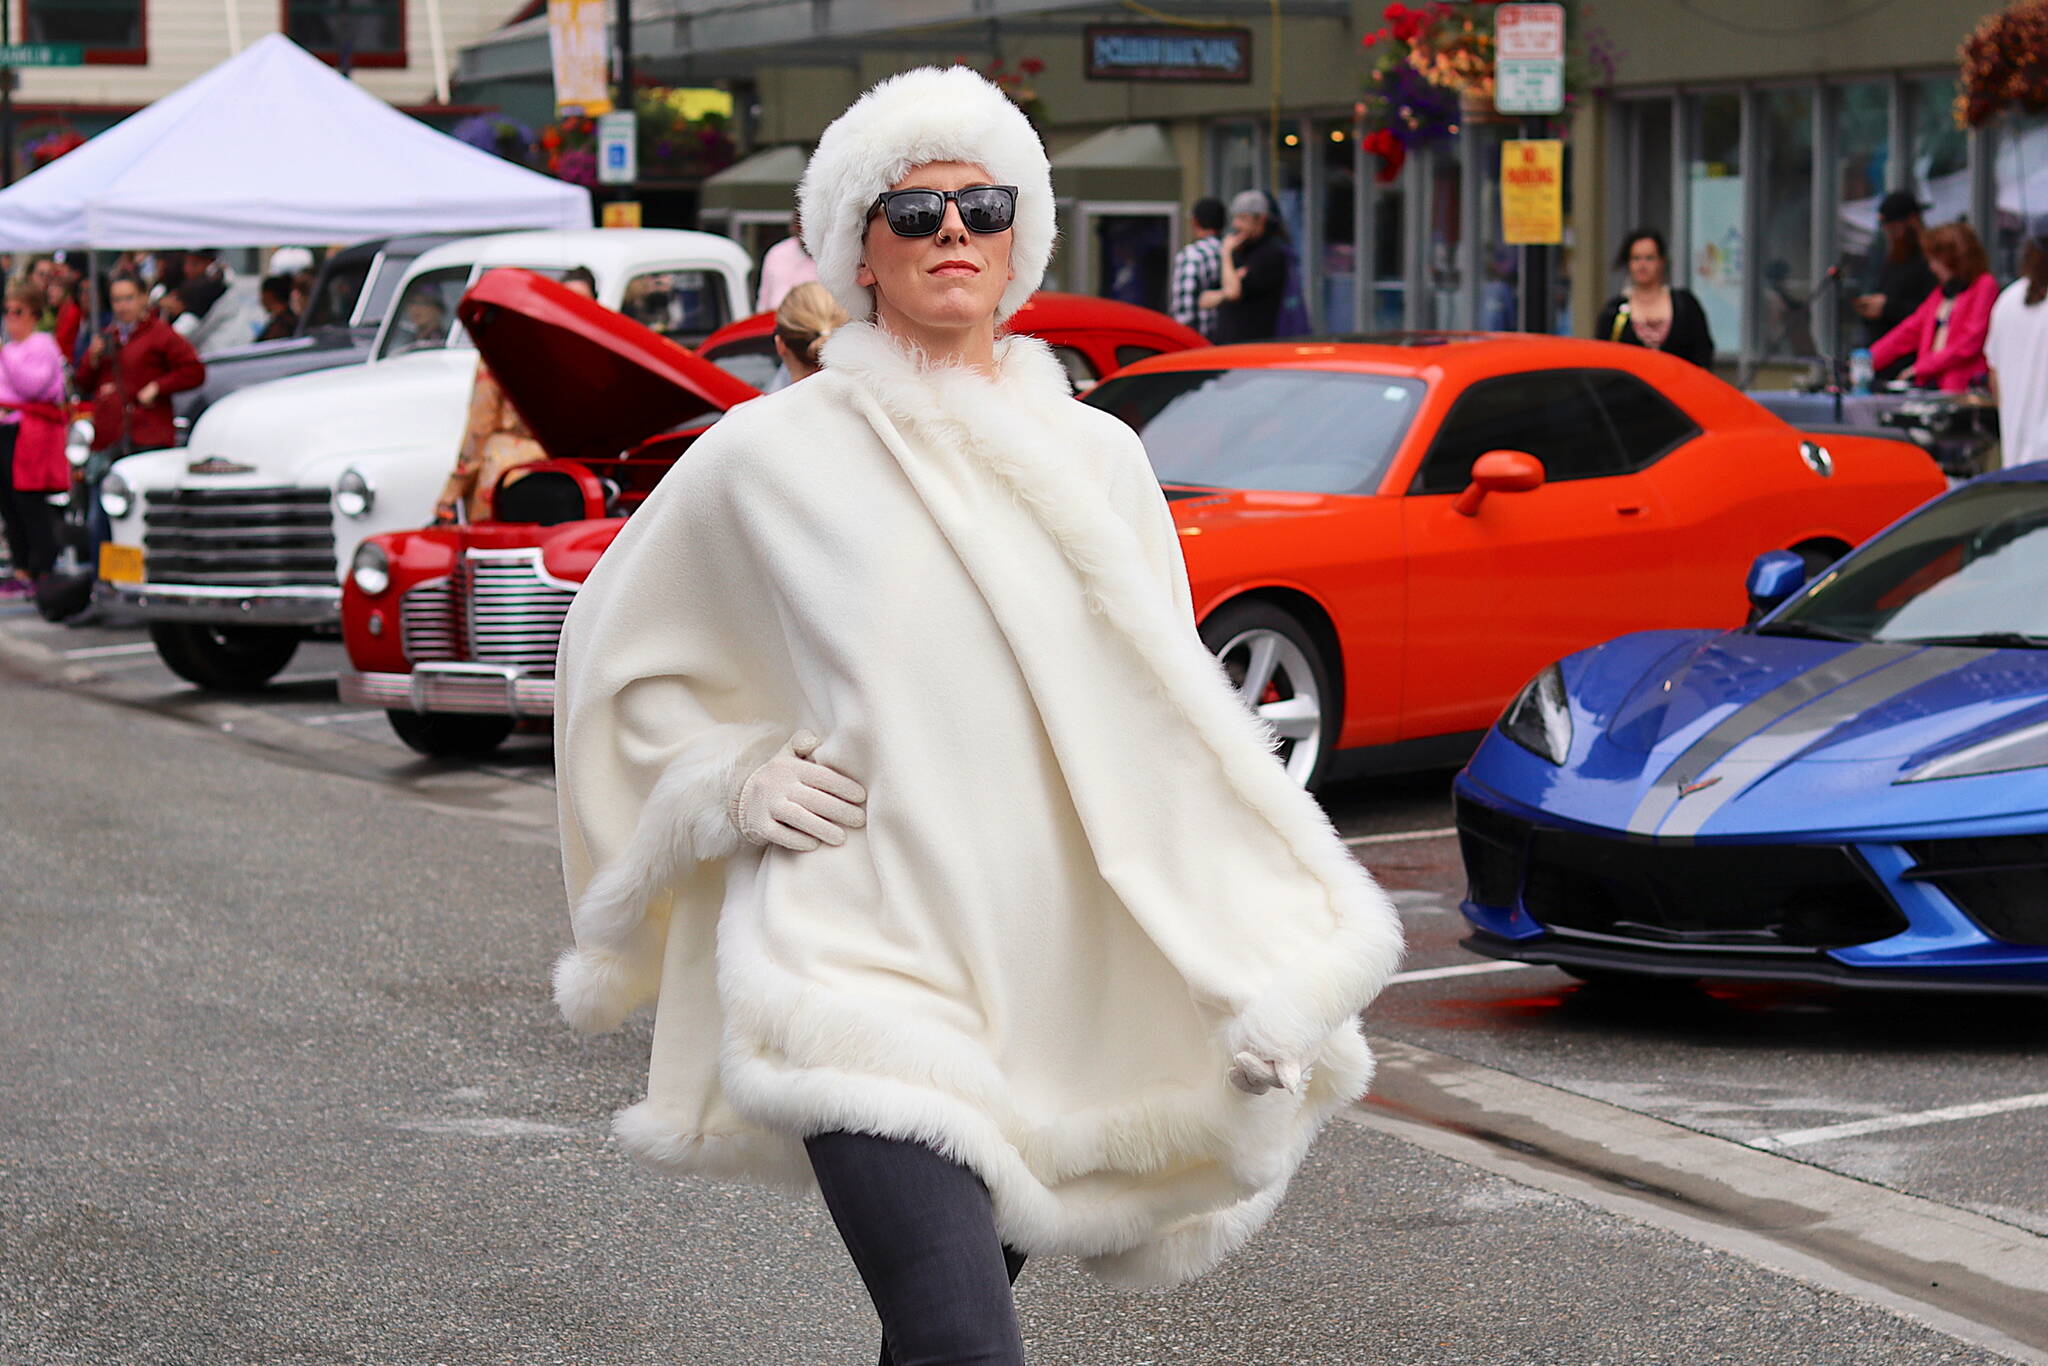 Jackie Kragel wears a fur-trimmed alpaca cape during Alaska Fashion Week’s outdoor runway show in downtown Juneau on Saturday. Kragel, a Palmer resident appearing in her first fashion show as a model, wore outfits by five different designers during the two-hour show, plus jewelry she made at her own studio. (Mark Sabbatini / Juneau Empire)